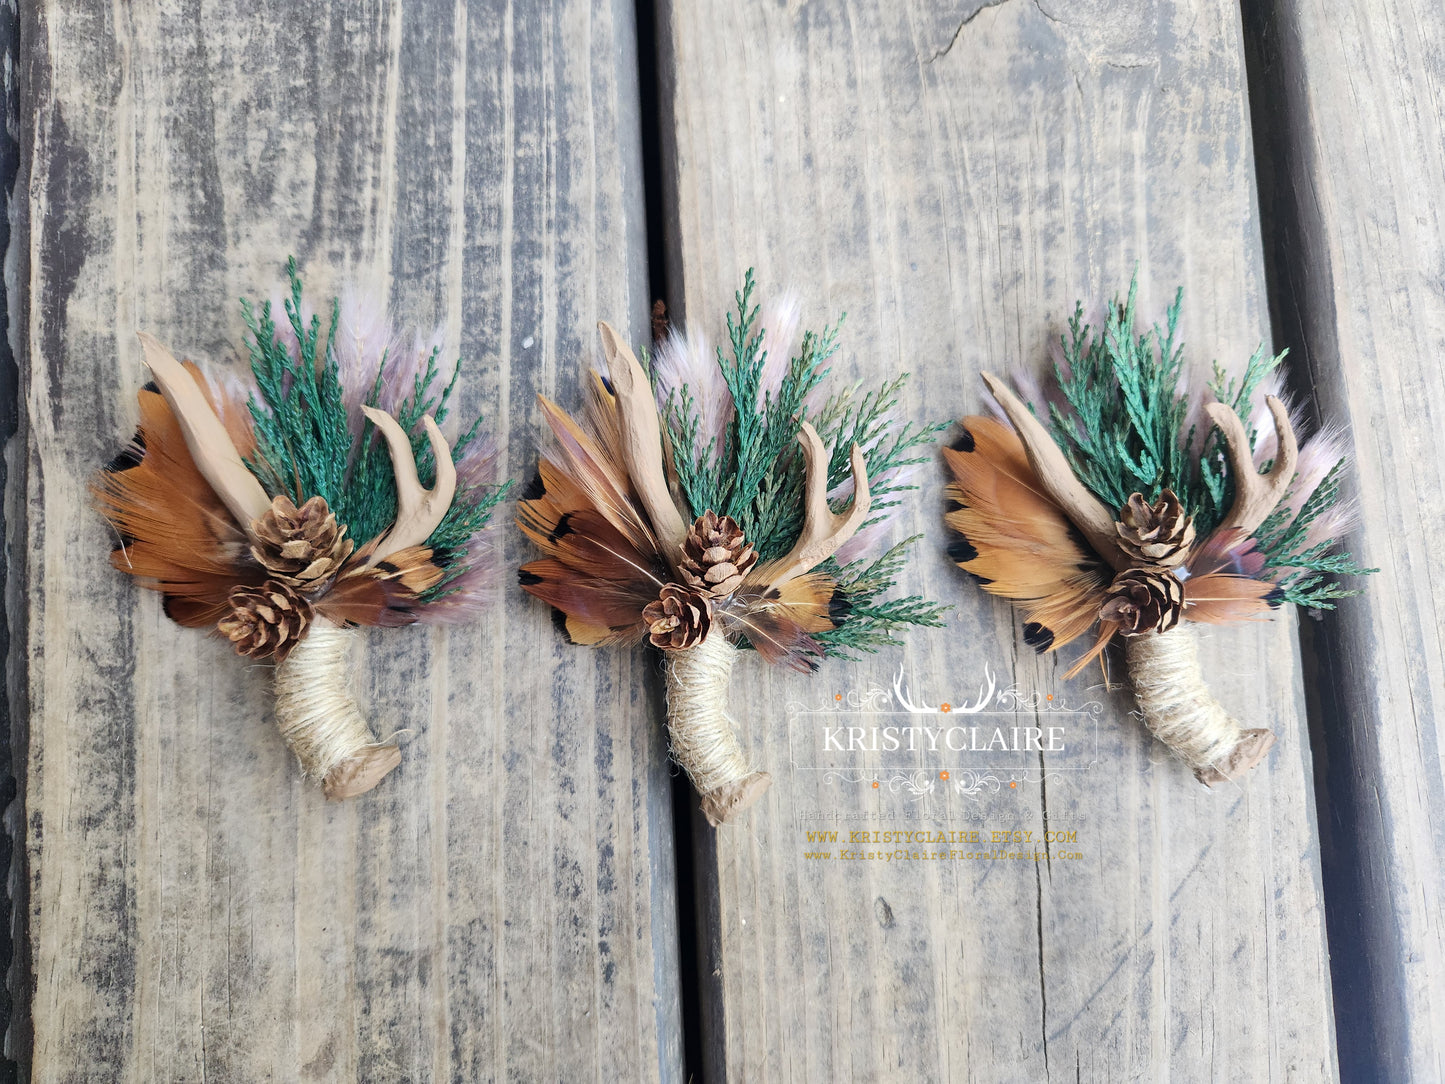 Beige Antler Boutonniere with Preserved Cedar, Pampas Grass, Pheasant Feathers & PineCones, Buttonhole, Lapel, Twine, Faux, Resin, Taxidermy